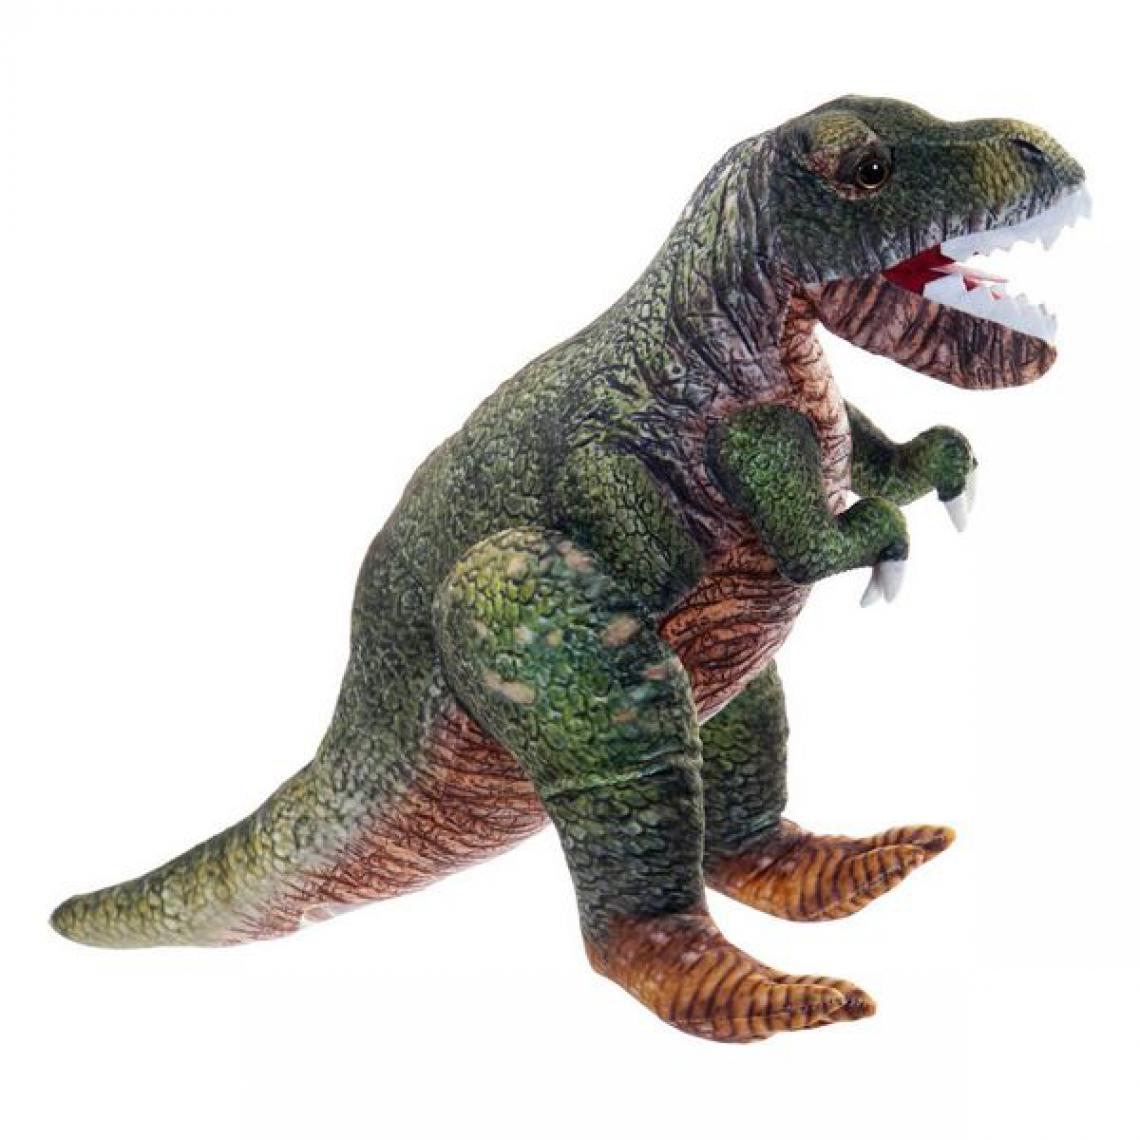 Unknown - Jouet Peluche DKD Home Decor Dinosaure Polyester (40 x 25 x 35 cm) - Animaux